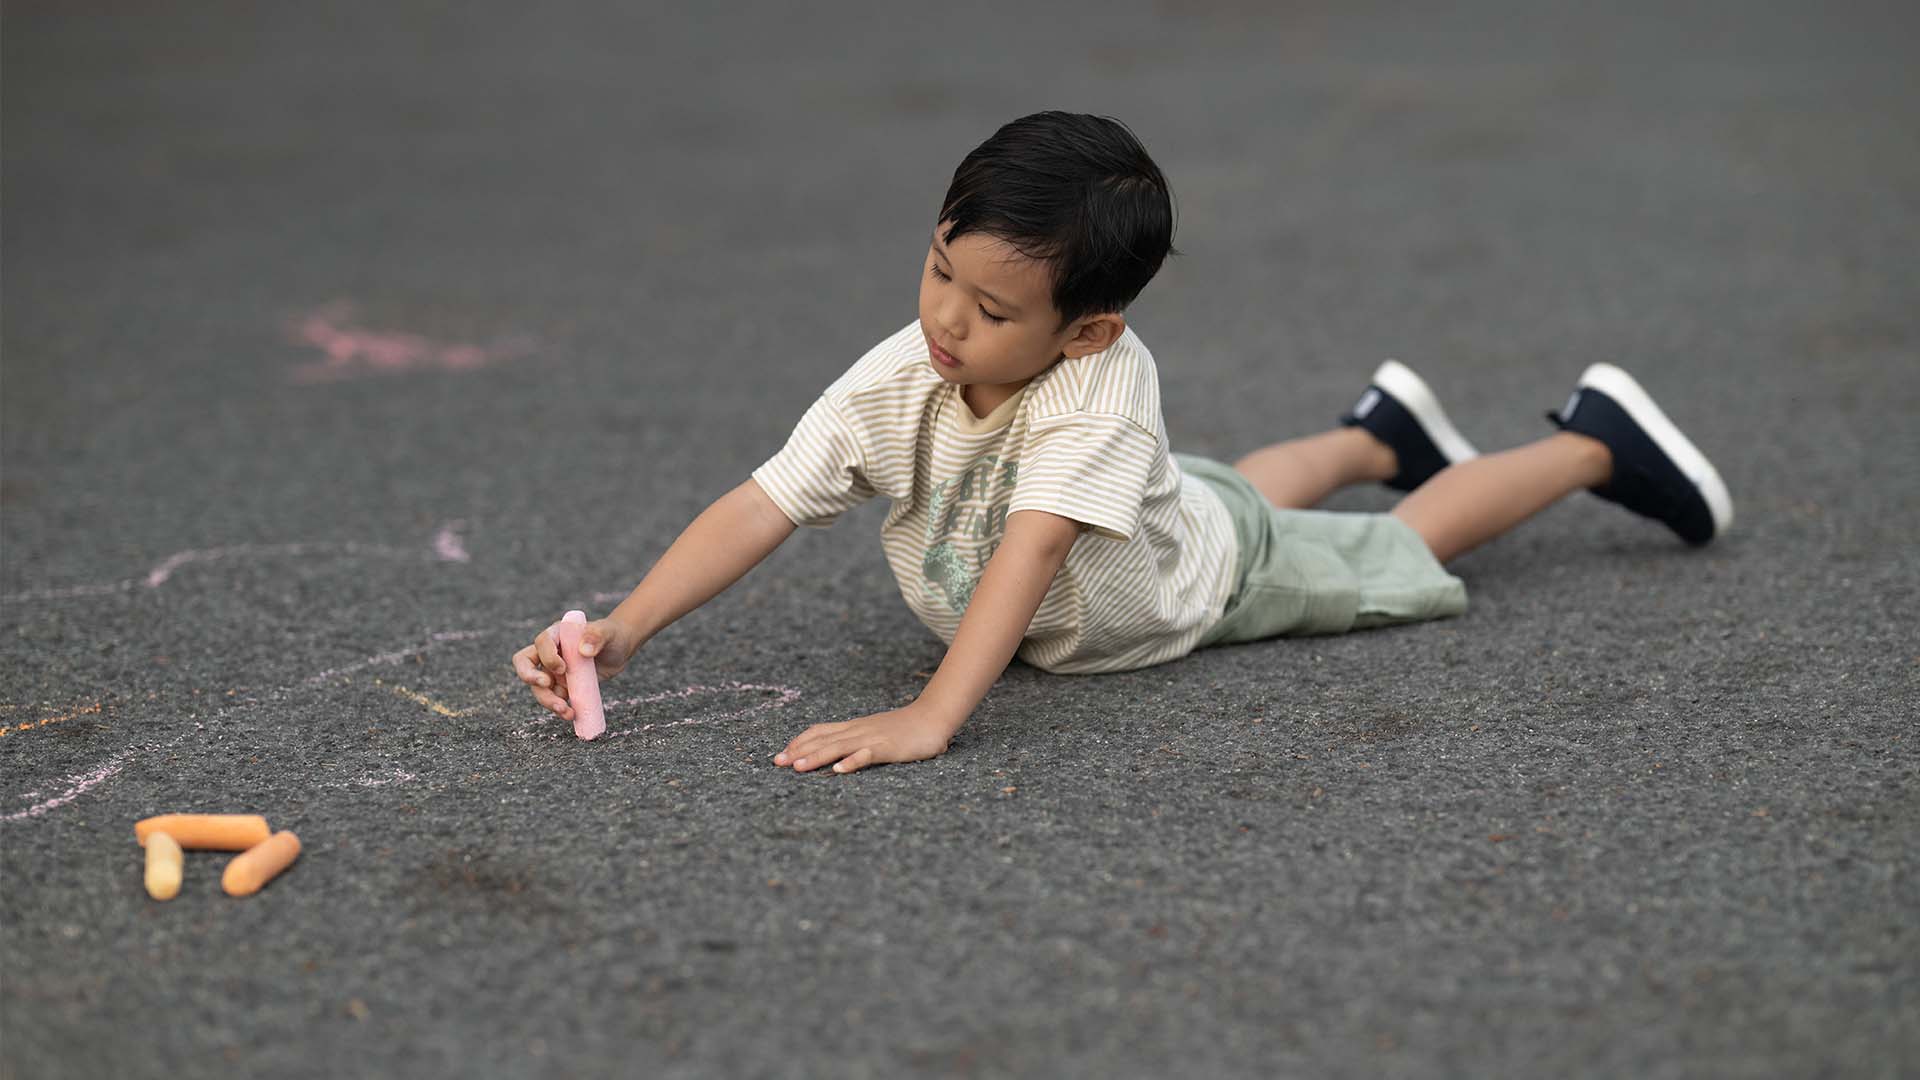  A toddler boy drawing with chalk on pavement, wearing a striped t-shirt and shorts, lying on his stomach.